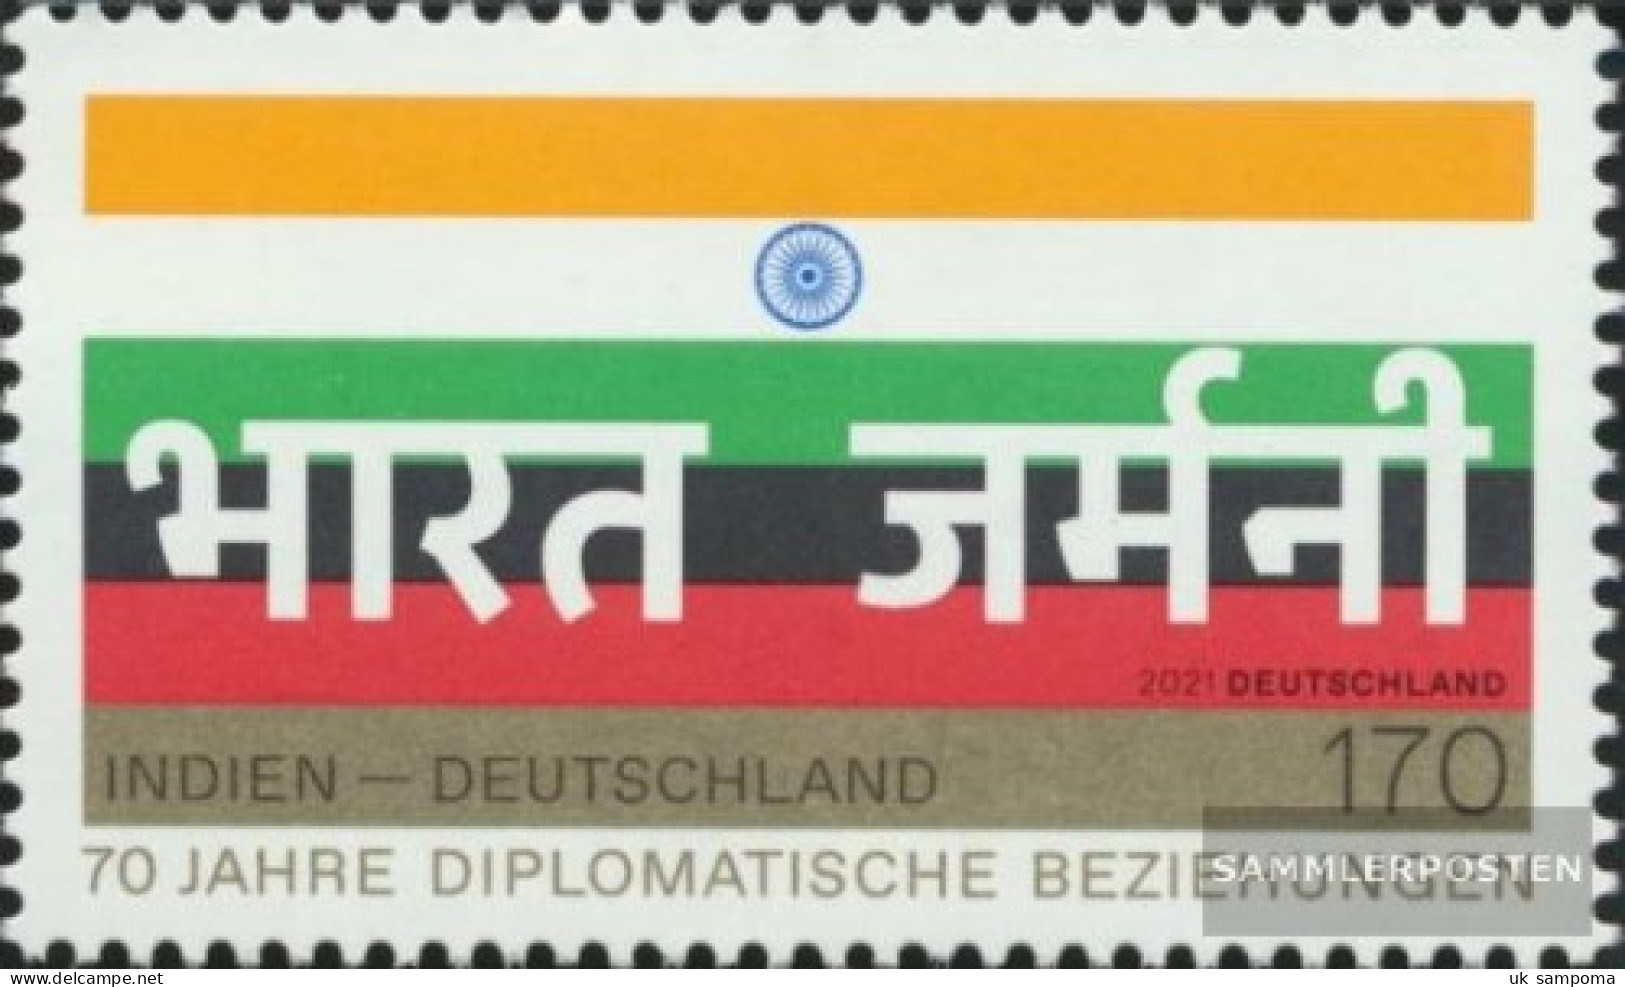 FRD (FR.Germany) 3612 (complete Issue) Unmounted Mint / Never Hinged 2021 Diplomacy With India - Nuevos